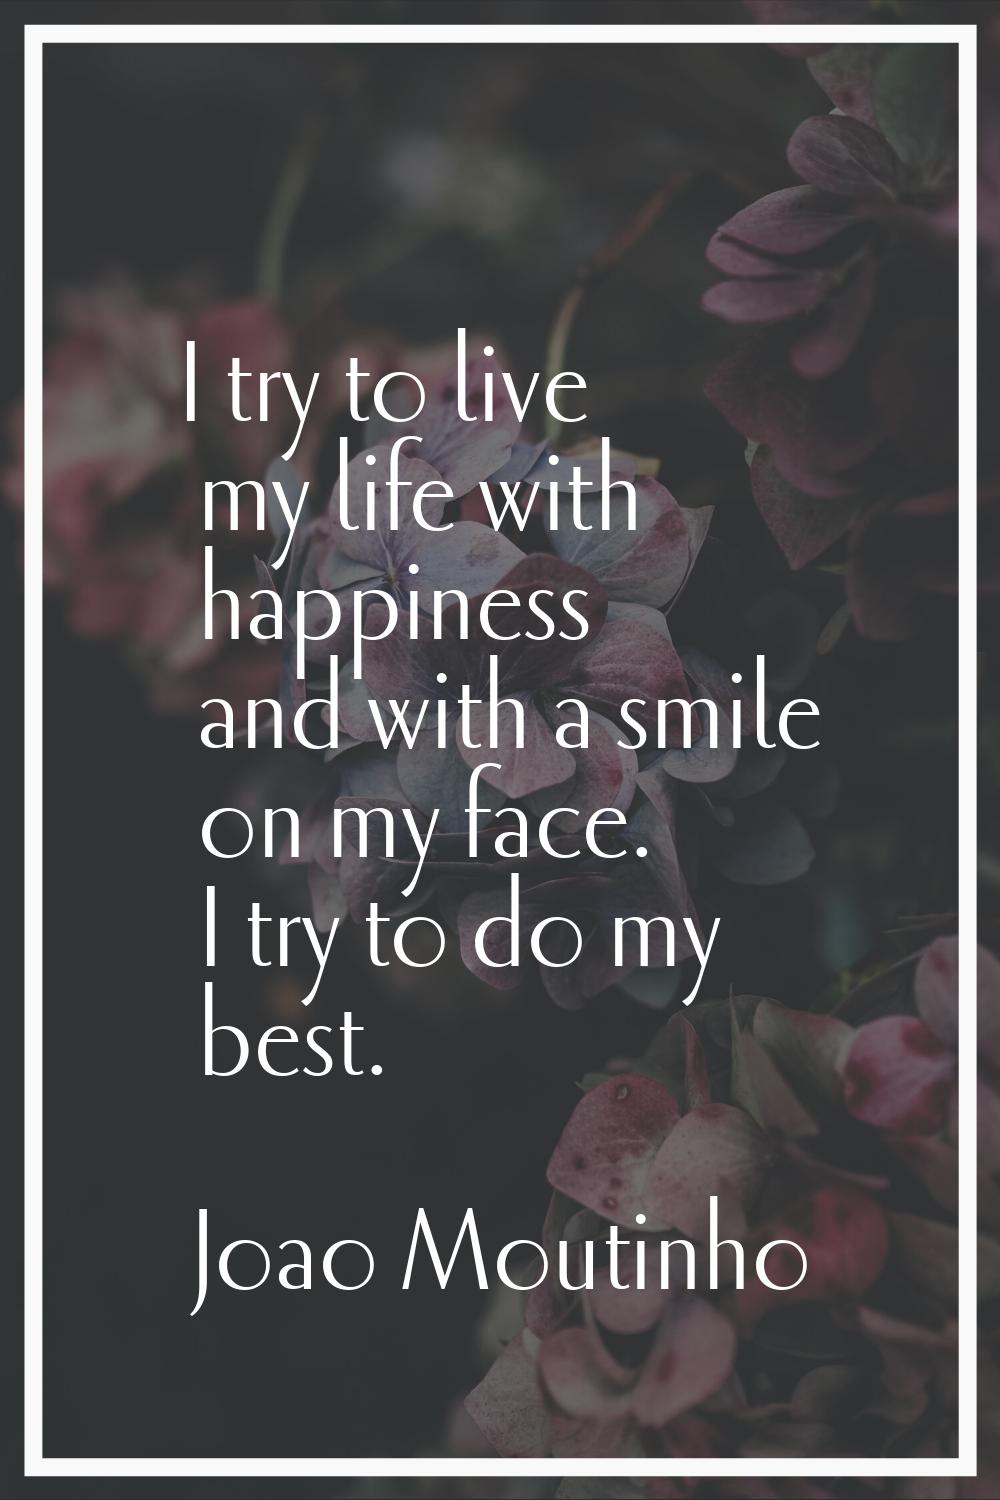 I try to live my life with happiness and with a smile on my face. I try to do my best.